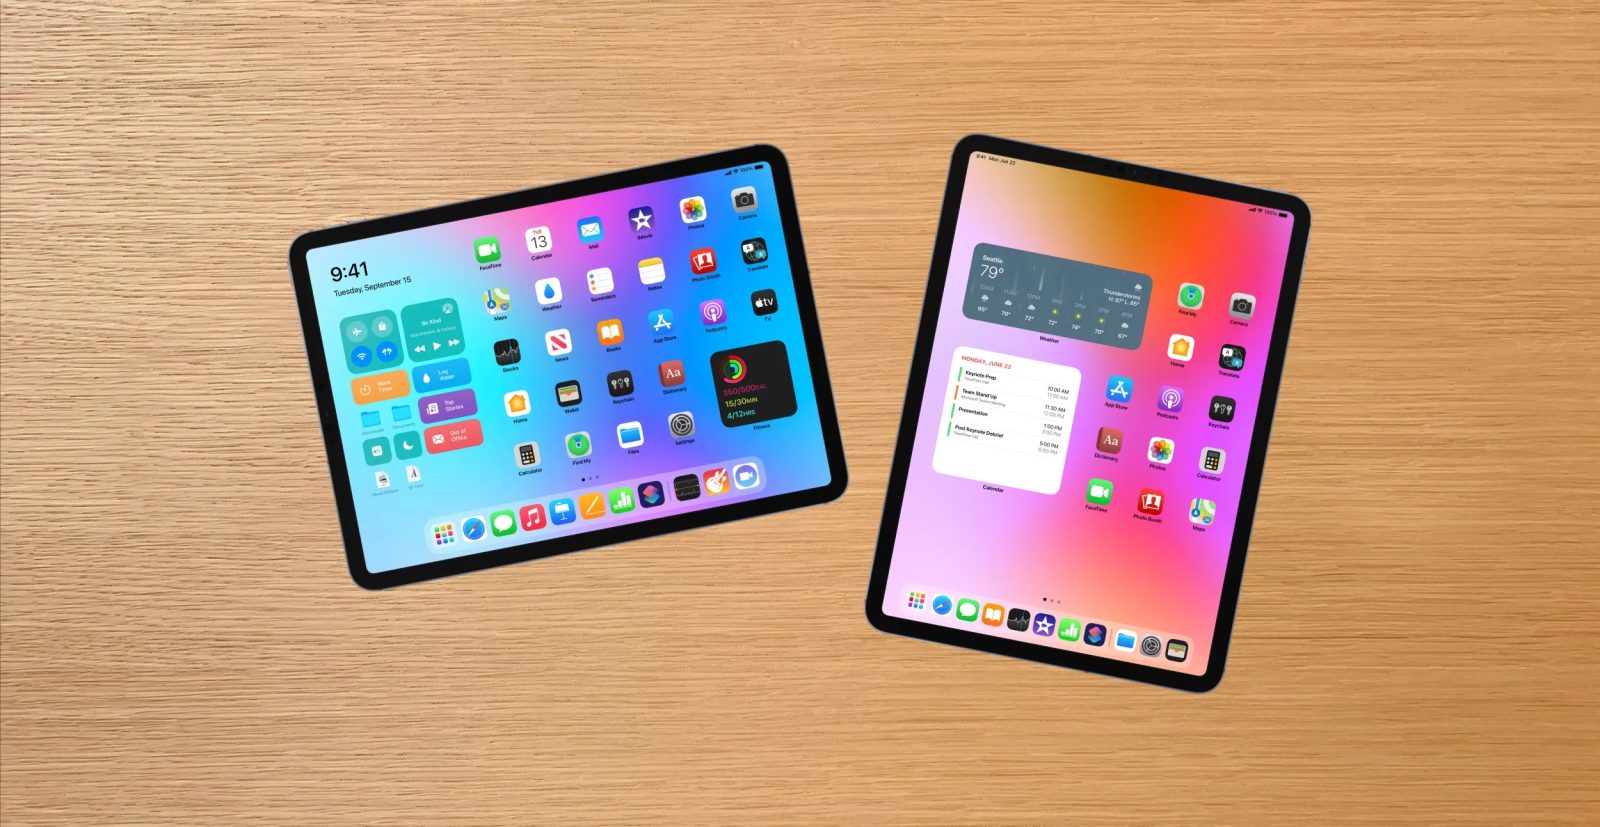 Bloomberg: iOS 15 to Feature Redesigned iPad Home Screen, New Notifications Options